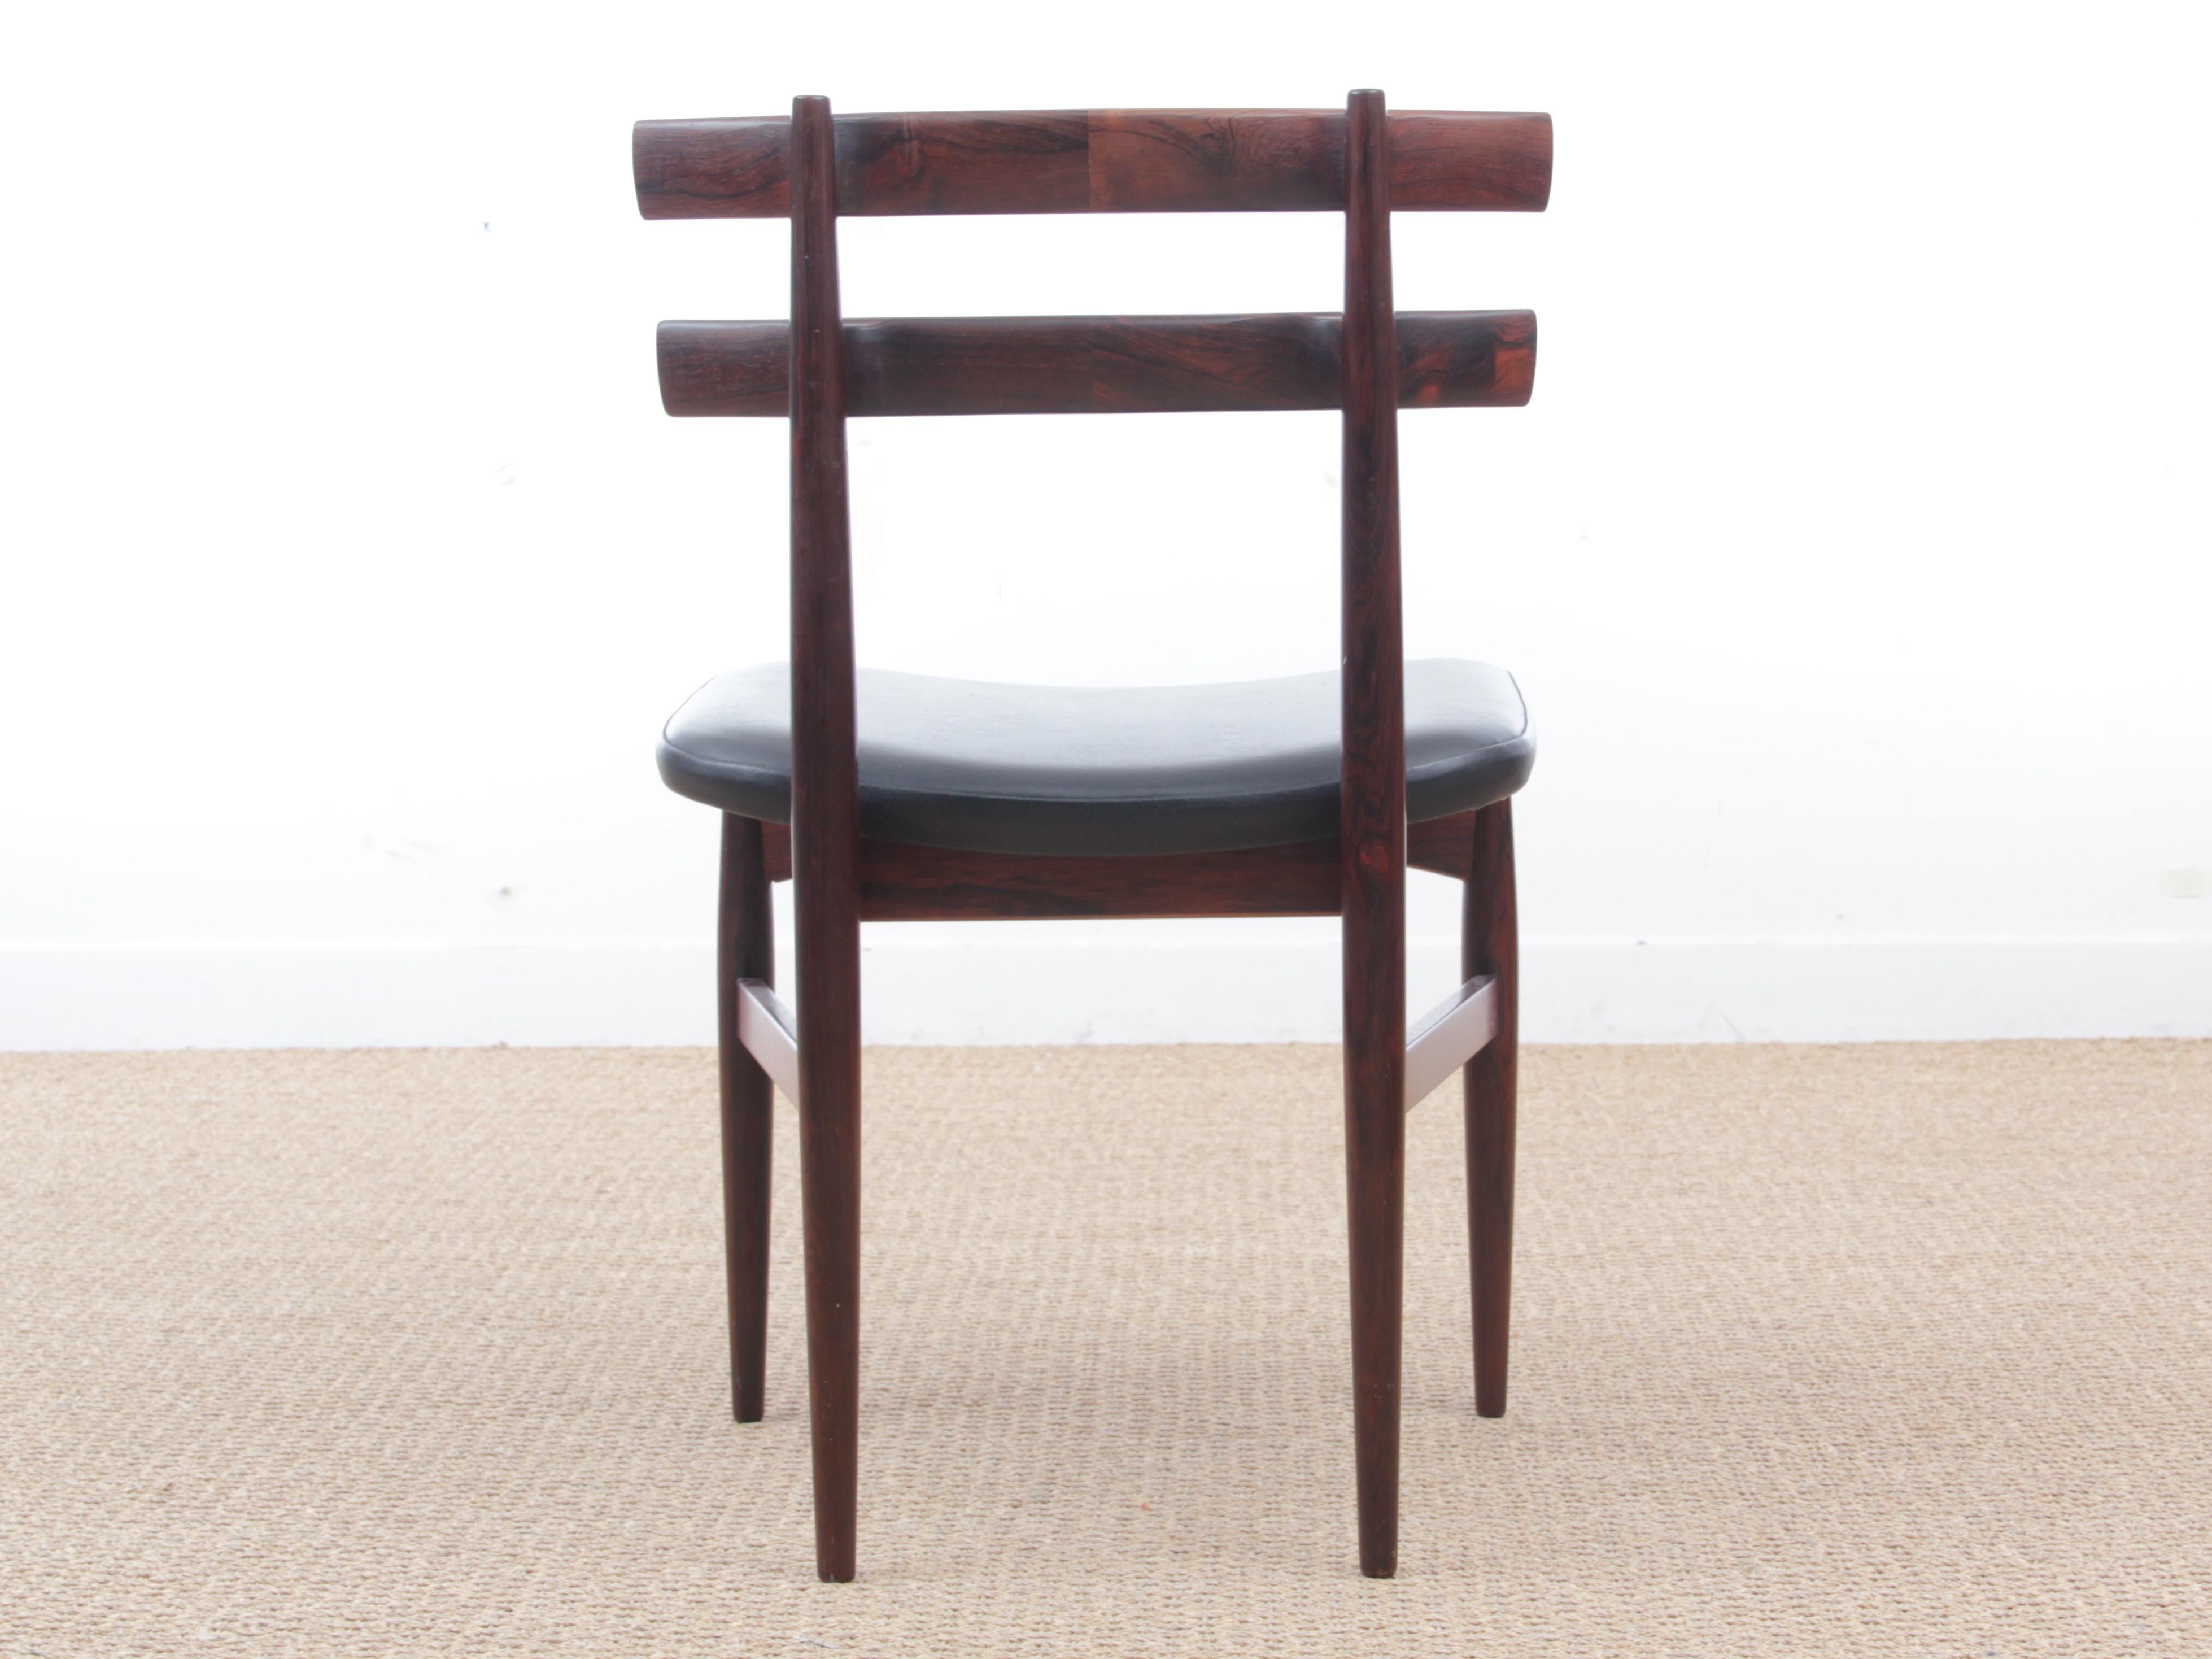 Mid-20th Century Mid-Century Modern Danish Set of Four Chairs in Rosewood by Poul Hundevad